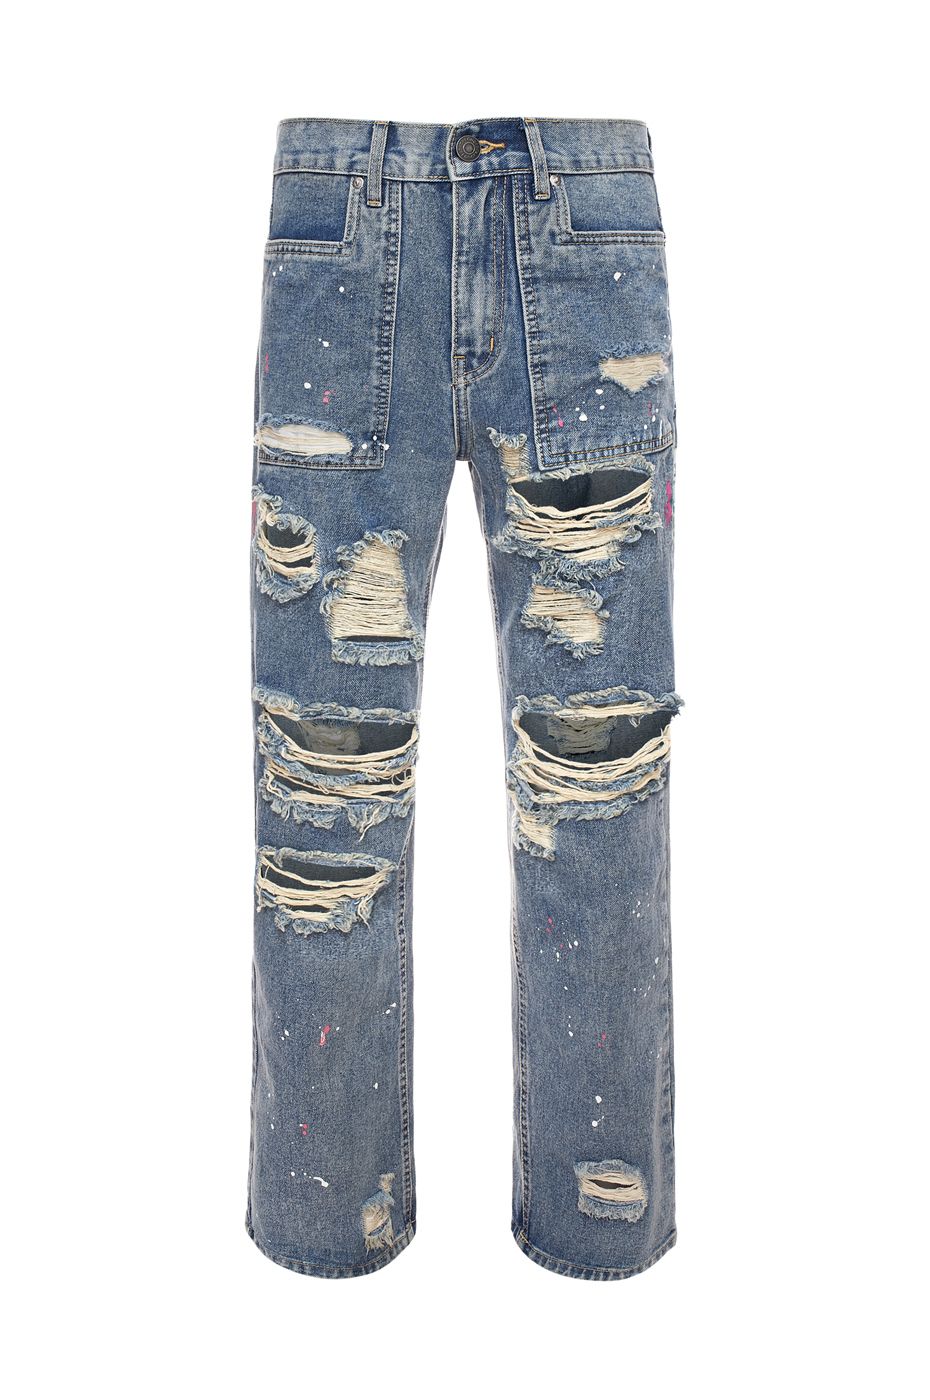  OFFONOFF RIPPED JEAN/BLUE 